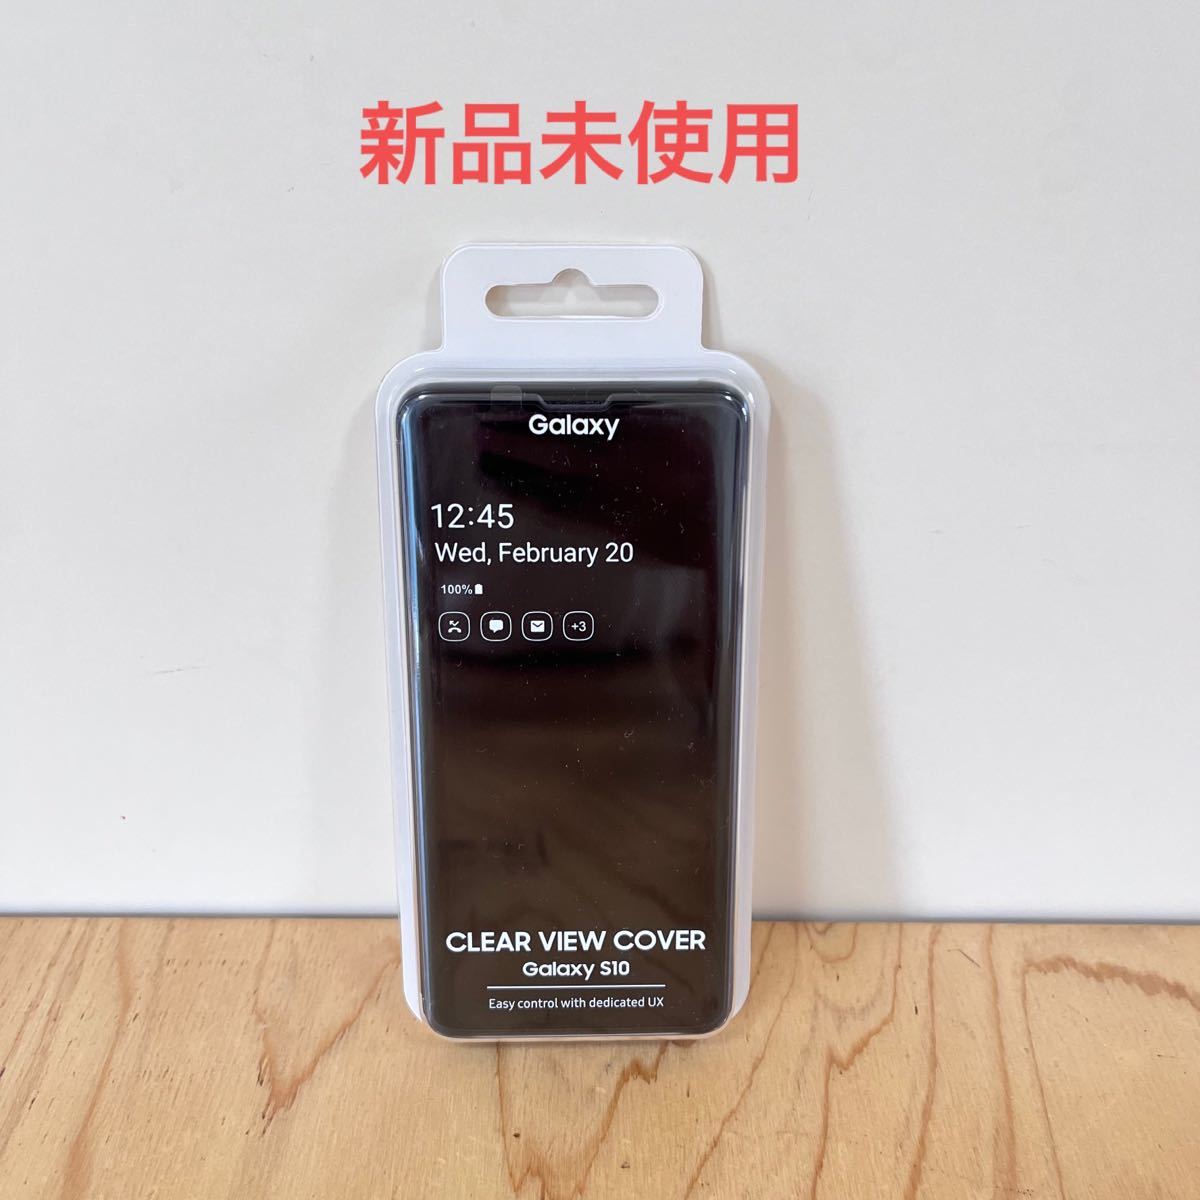 Galaxy純正 Galaxy S10 Clear View Cover｜PayPayフリマ